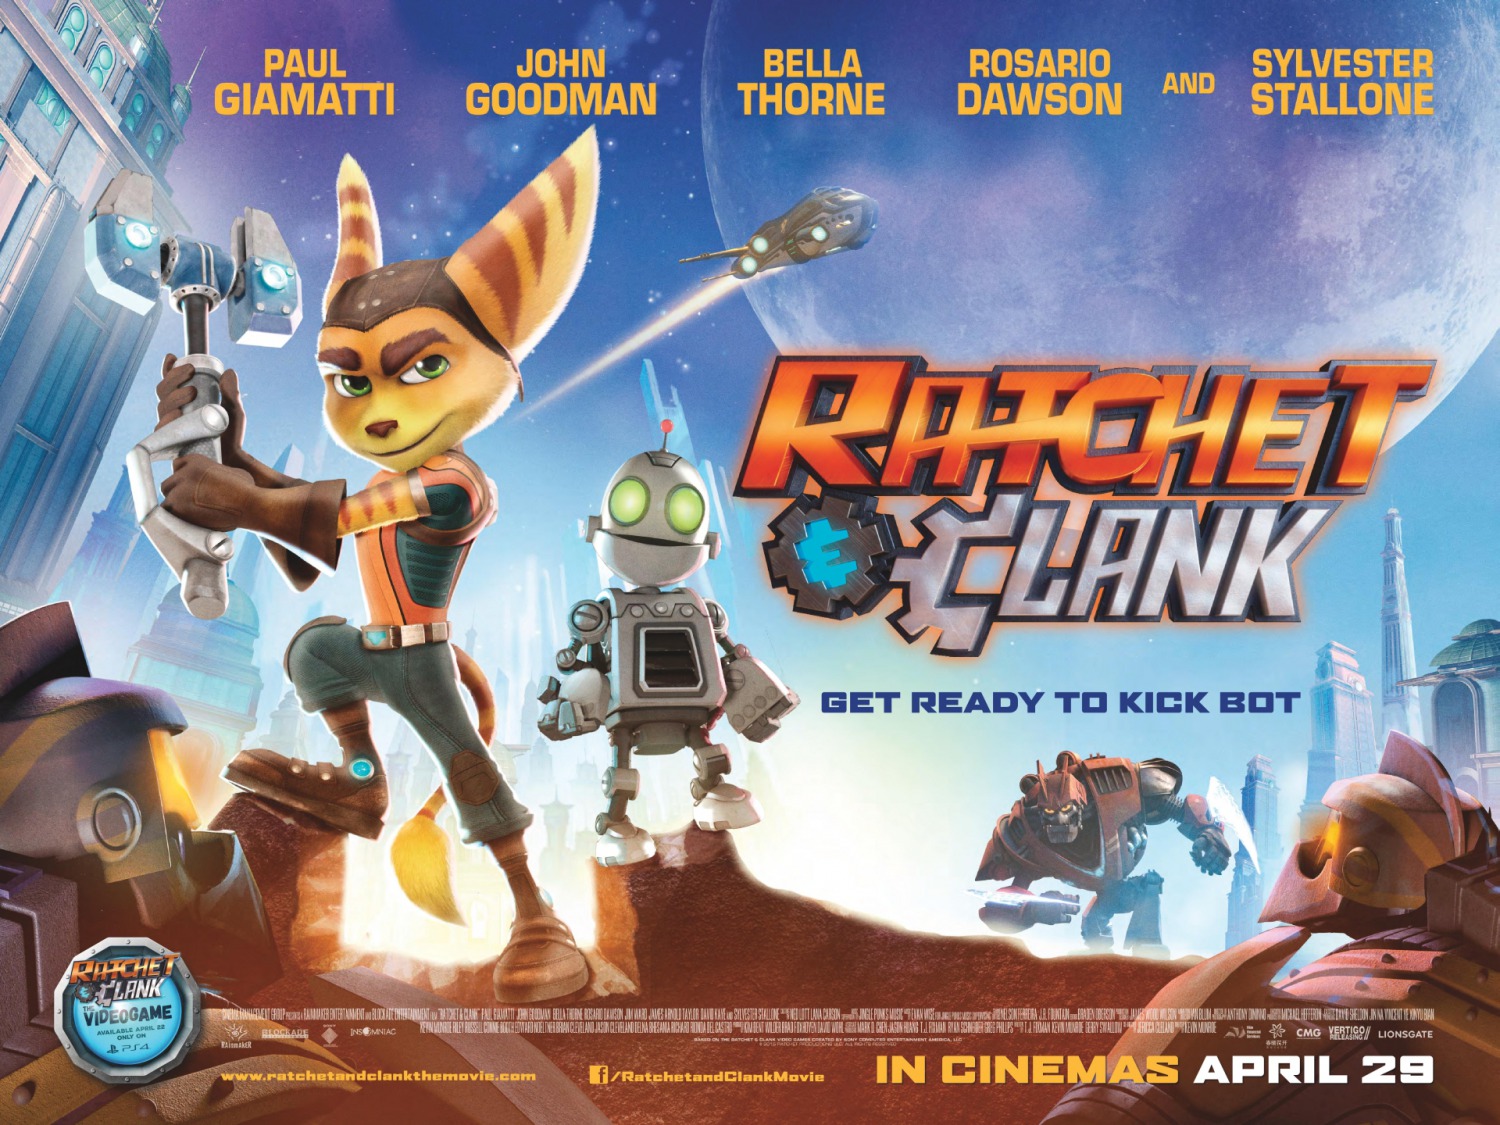 Extra Large Movie Poster Image for Ratchet and Clank (#4 of 5)